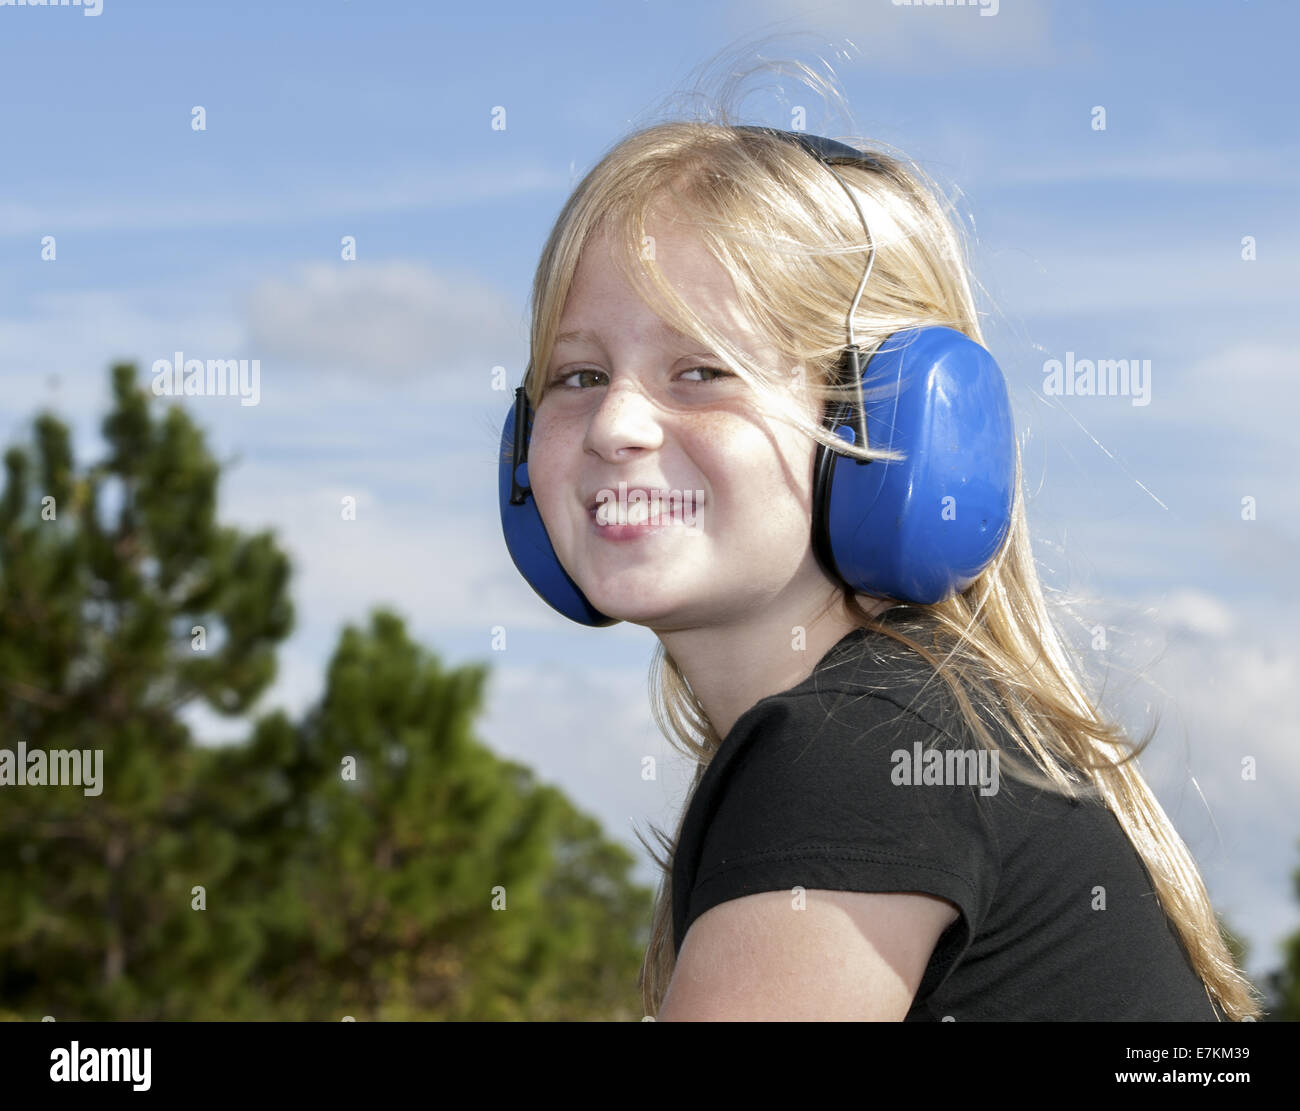 8-9 yr old girl with blue ear protection Stock Photo